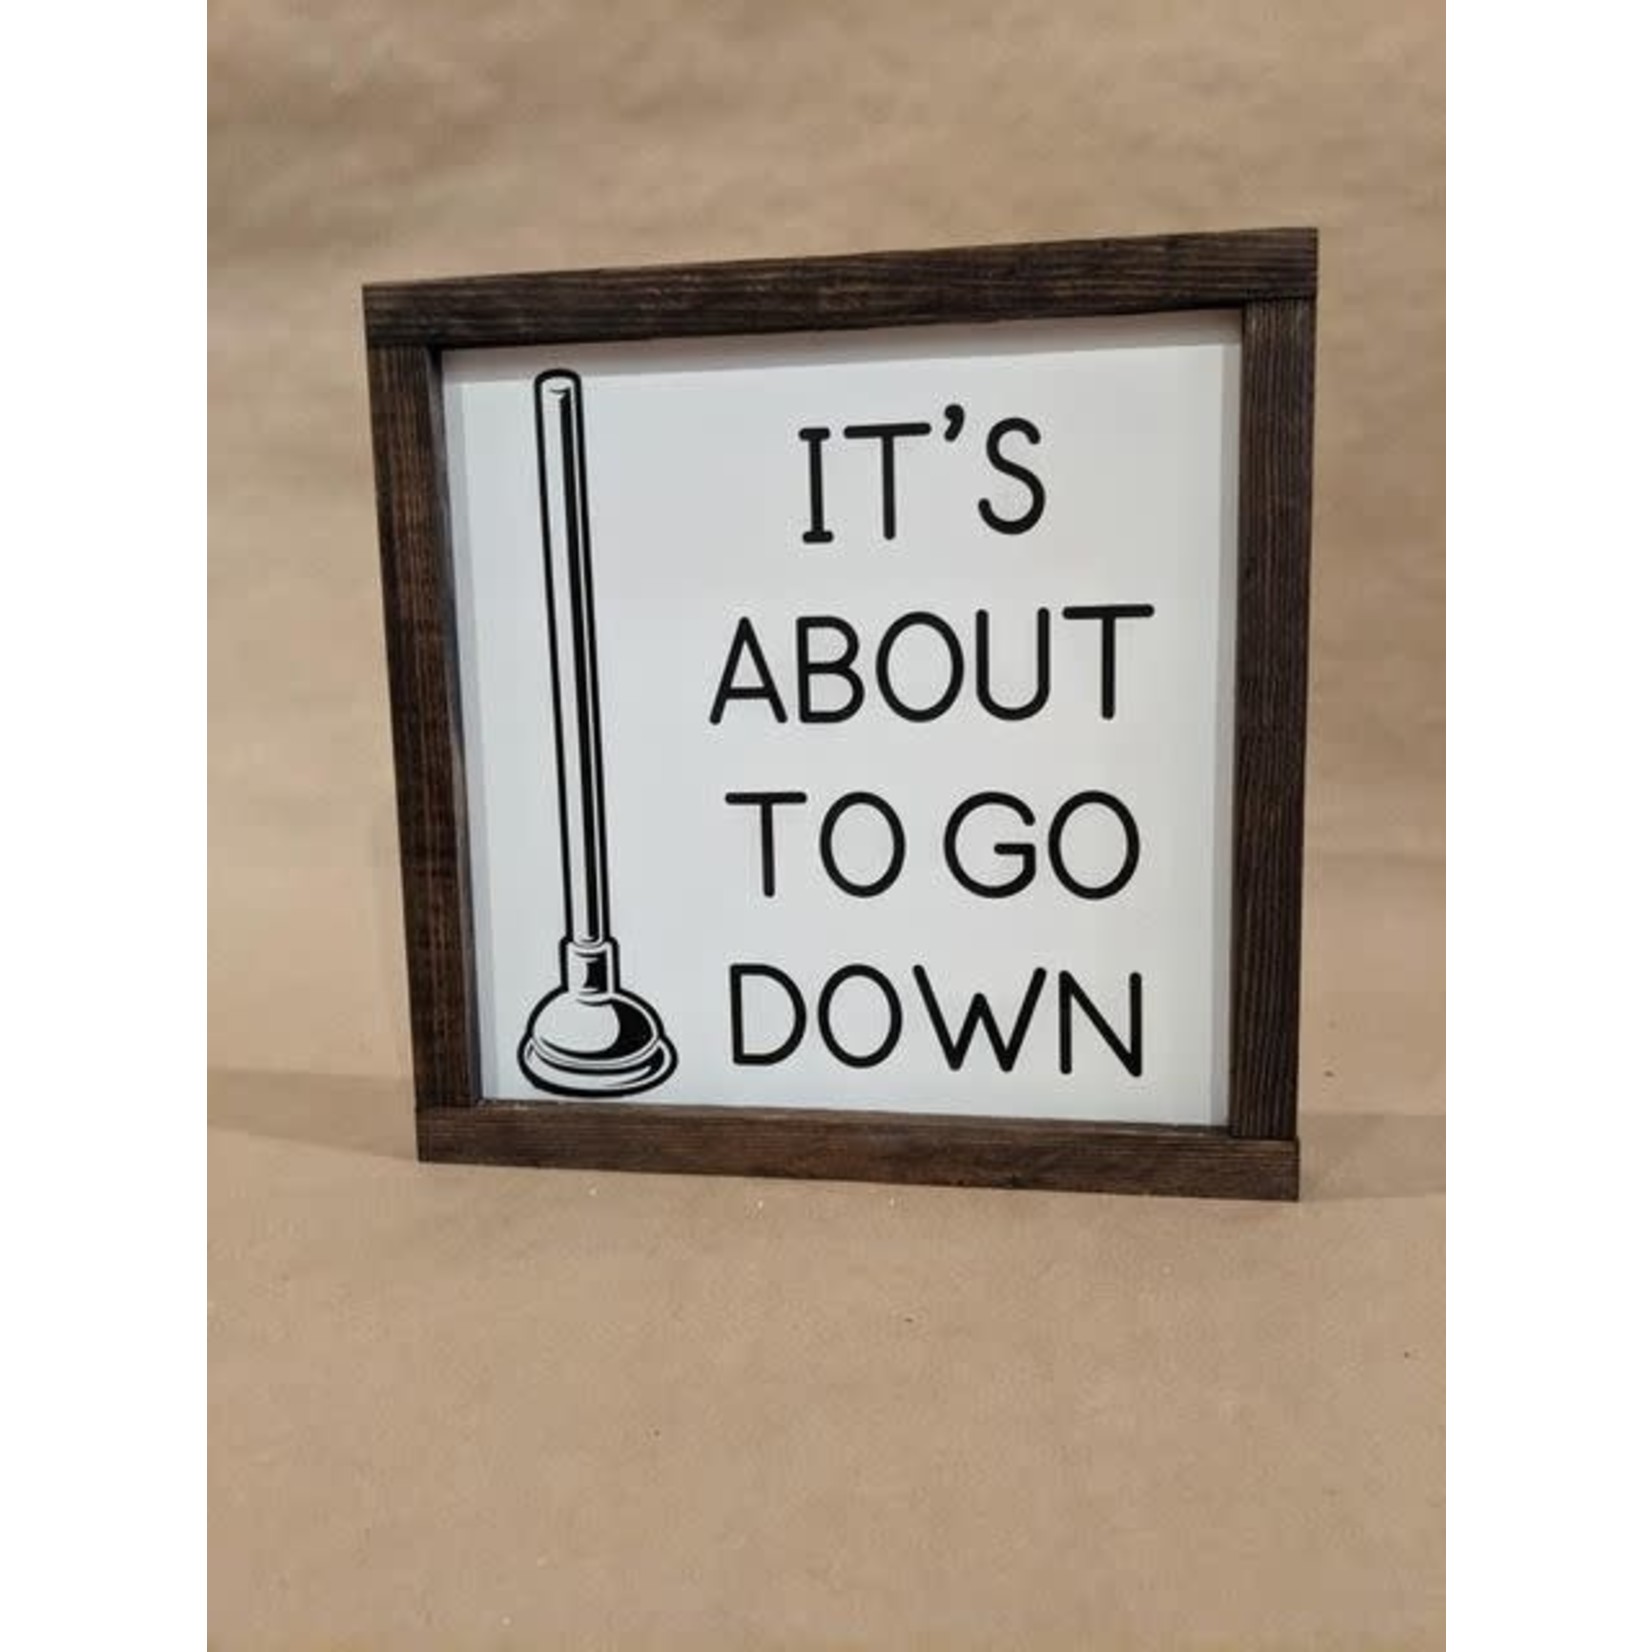 About to go down...  10x10 framed sign